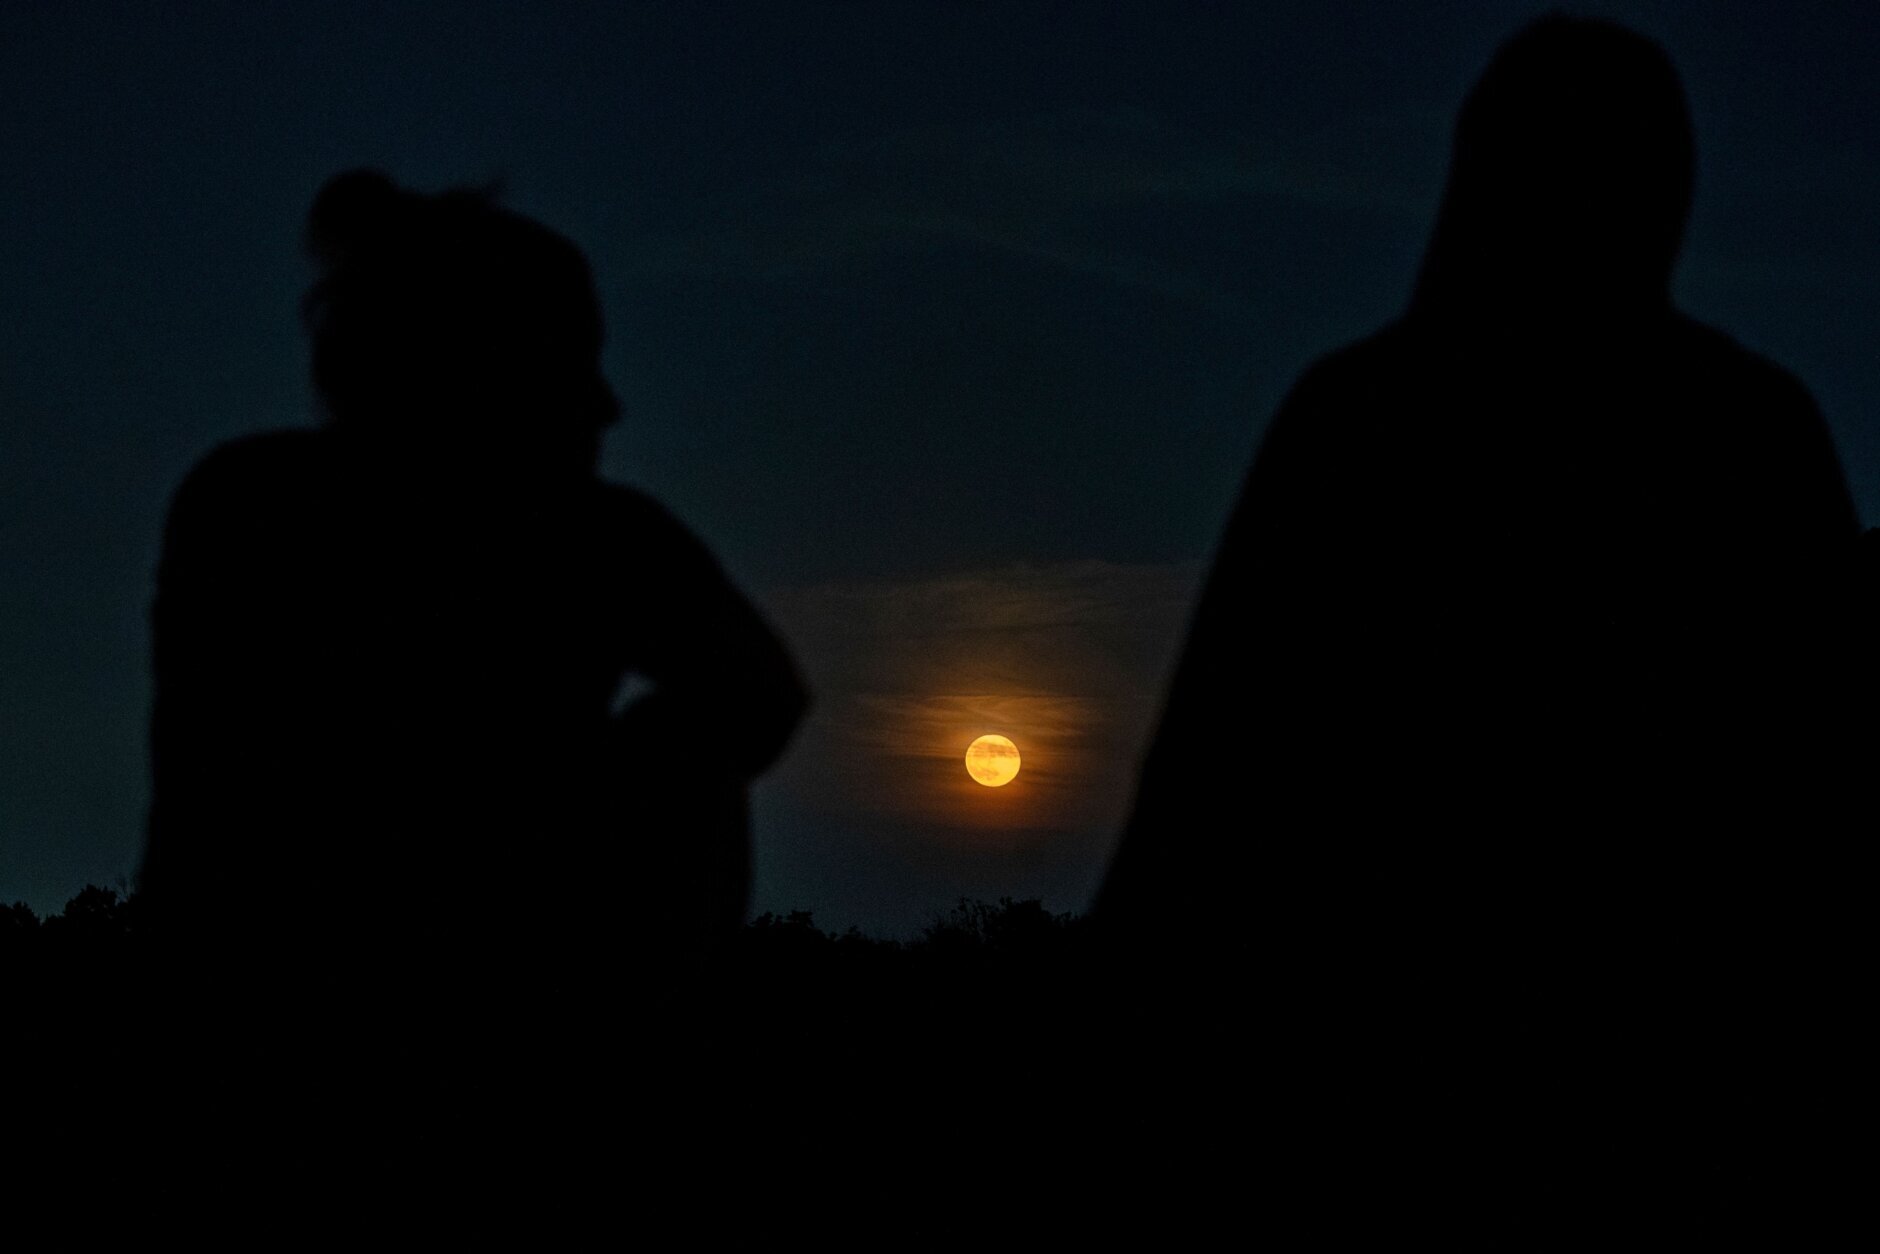 Onlookers watch as the full "Strawberry moon" rises in Arlington, Virginia, on June 14, 2022. (Photo by Stefani Reynolds / AFP) (Photo by STEFANI REYNOLDS/AFP via Getty Images)